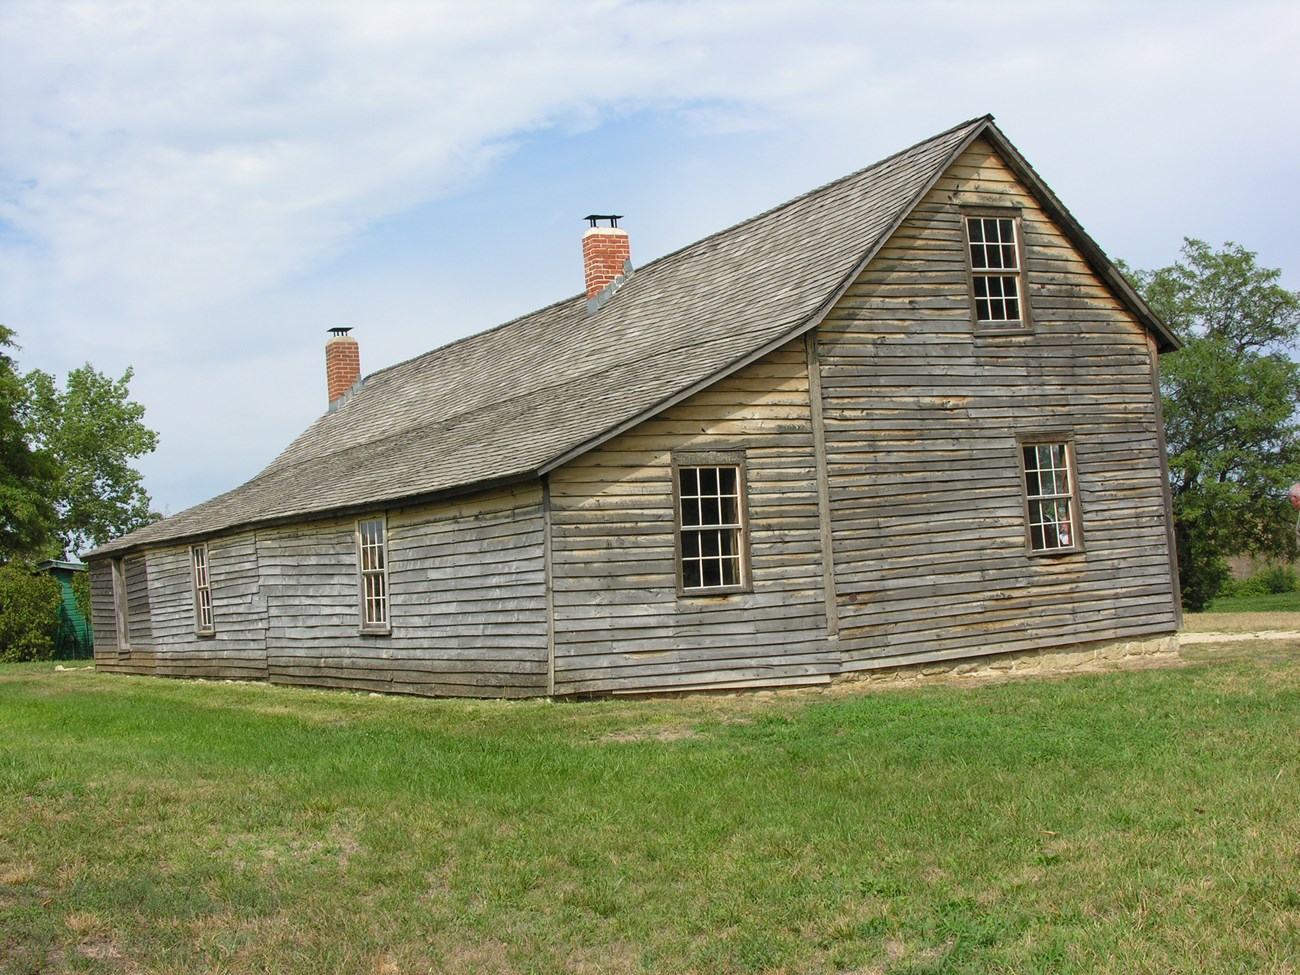 A brown wood barn with a slanted, peaked roof.